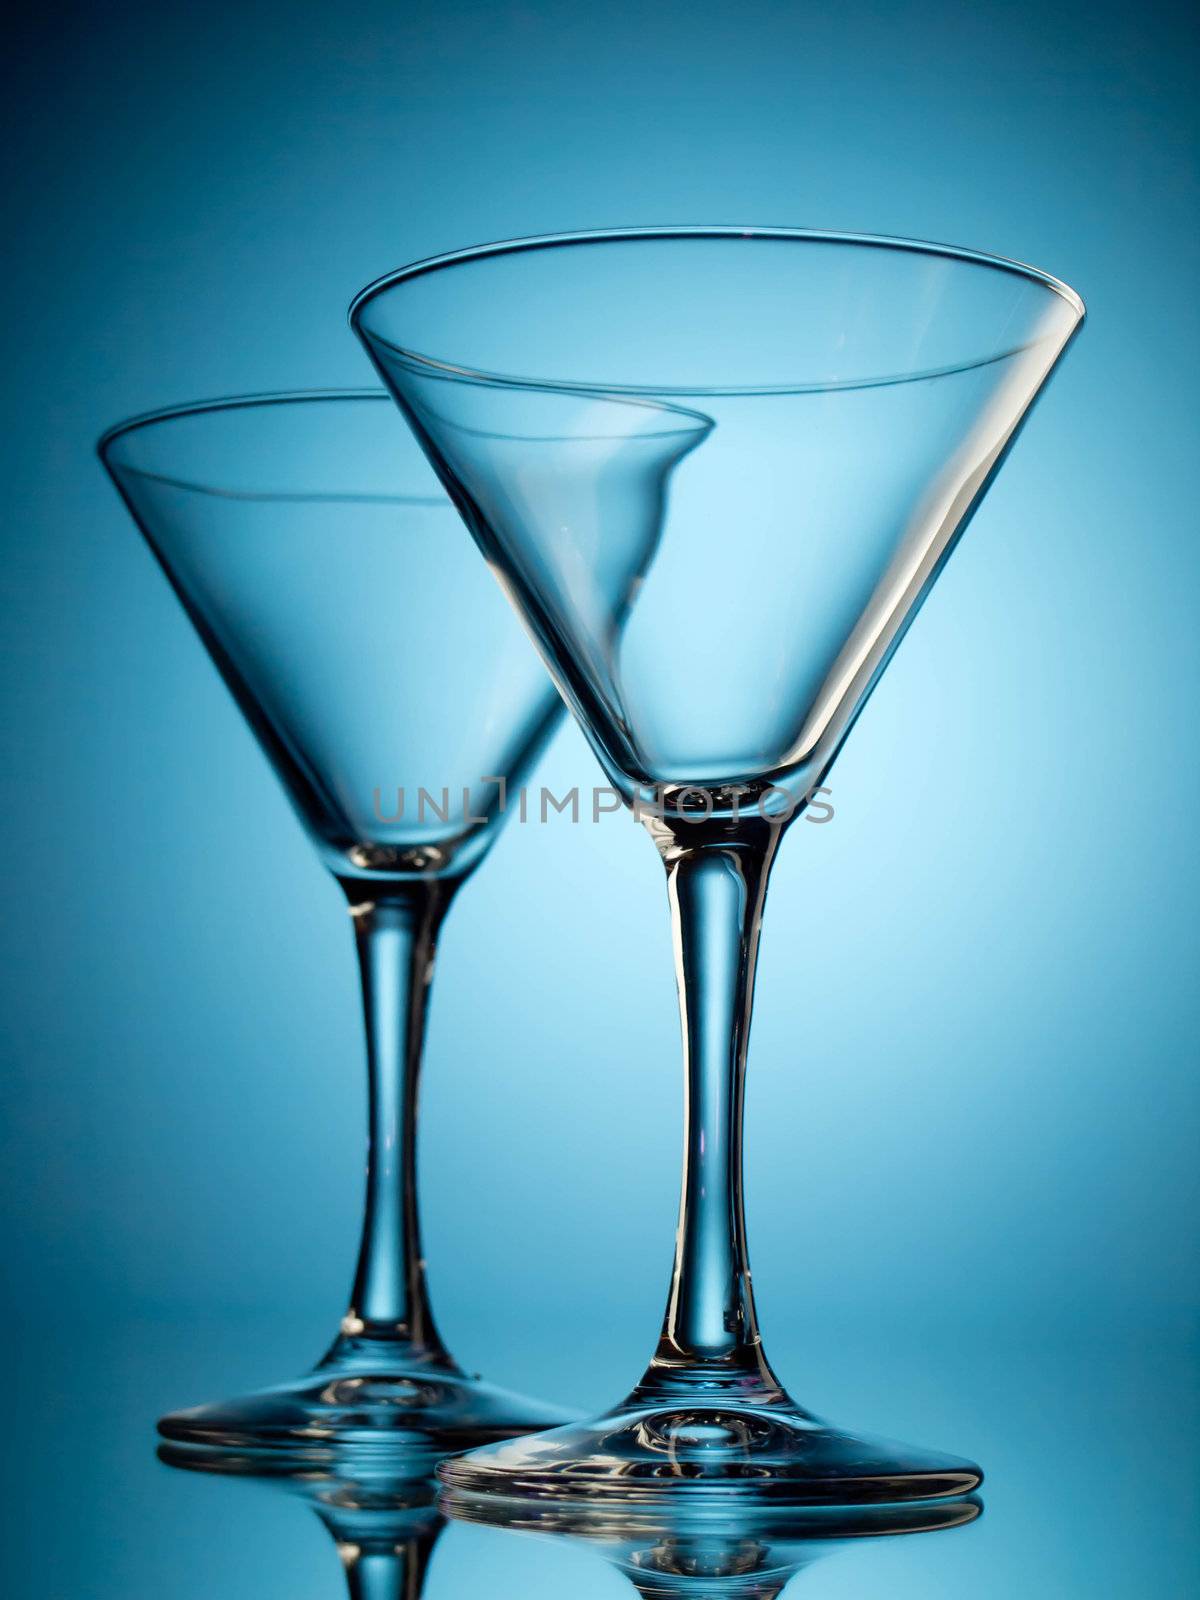 Two empty martini glasses on blue background